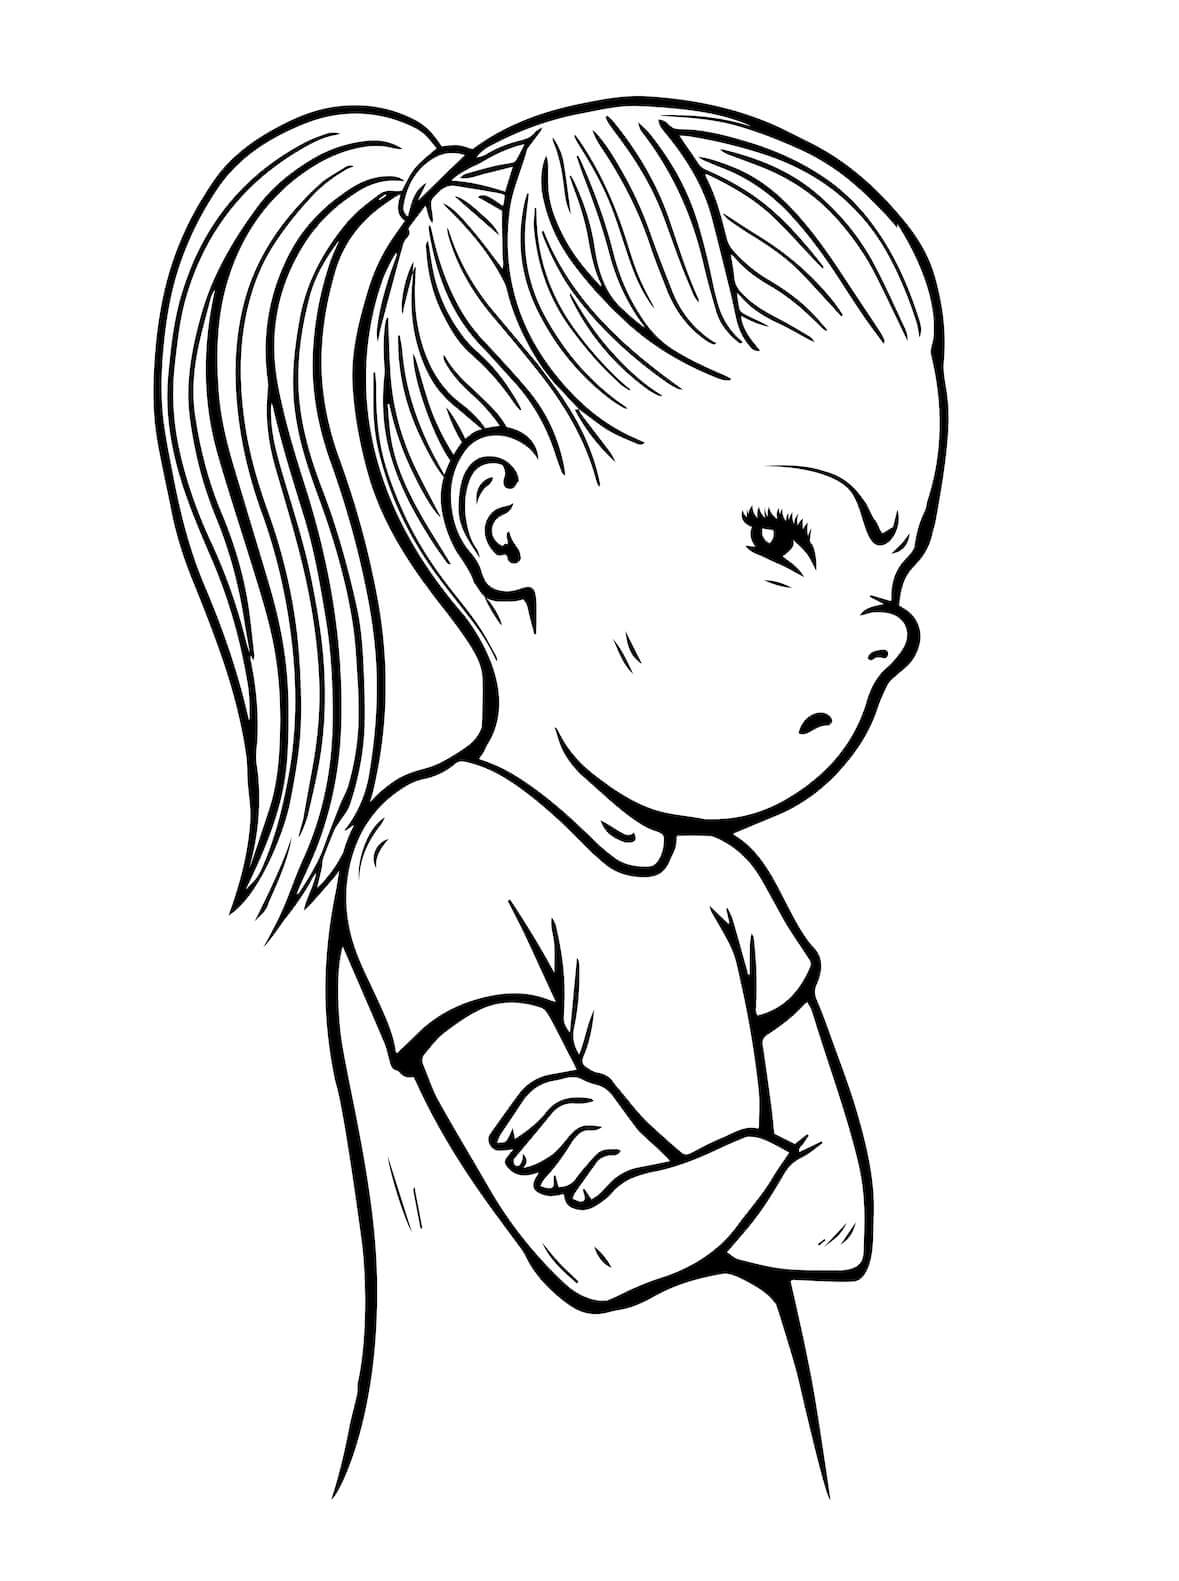 black and white sketch of young girl with folded arms and frown on her face standing slightly sideways